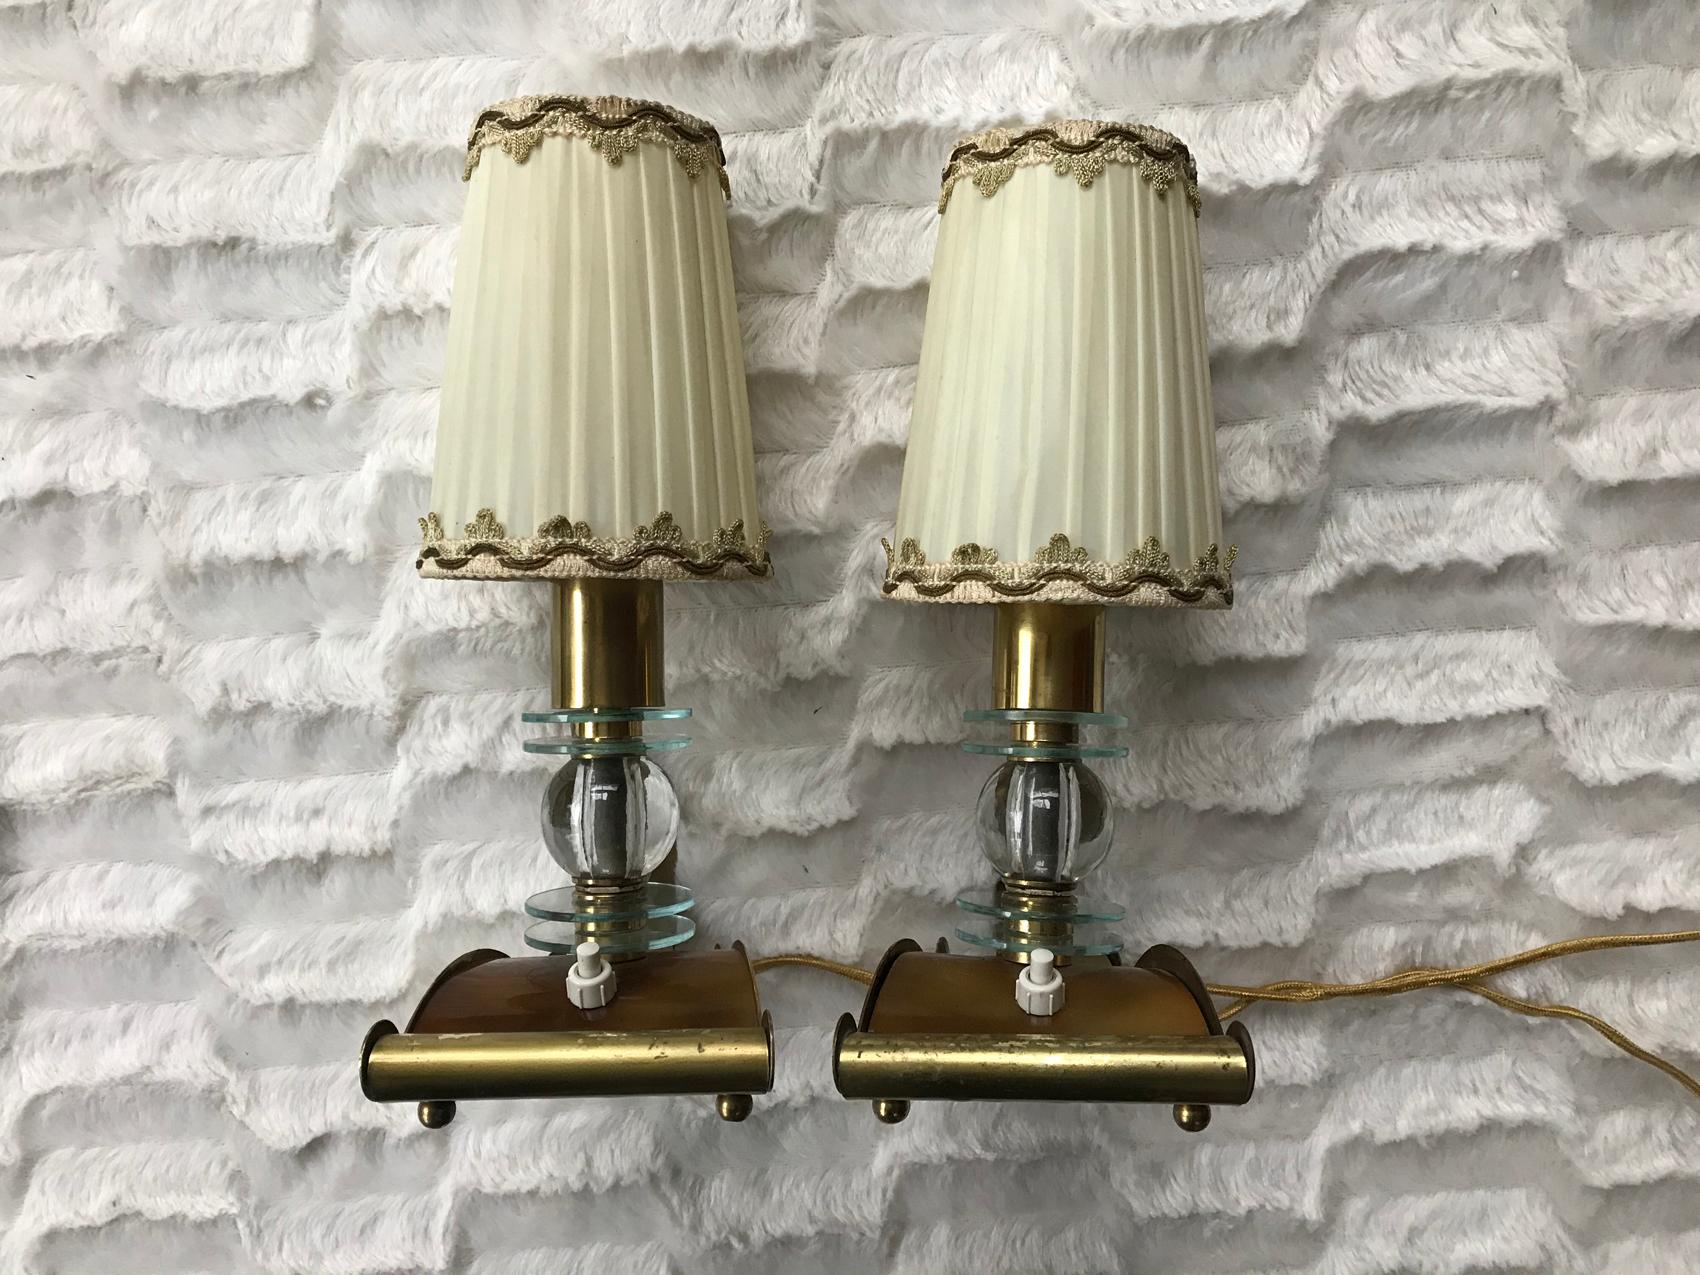 Rare pair of Jacques Adnet table lamps.
France, 1950s.
With its original lampshades.
In a very good general condition.
Dimensions of each one:
10 x H x 27 x 13 cm
With the lampshade D 10 x H 13 cm
Without the lampshade H 18cm.
 